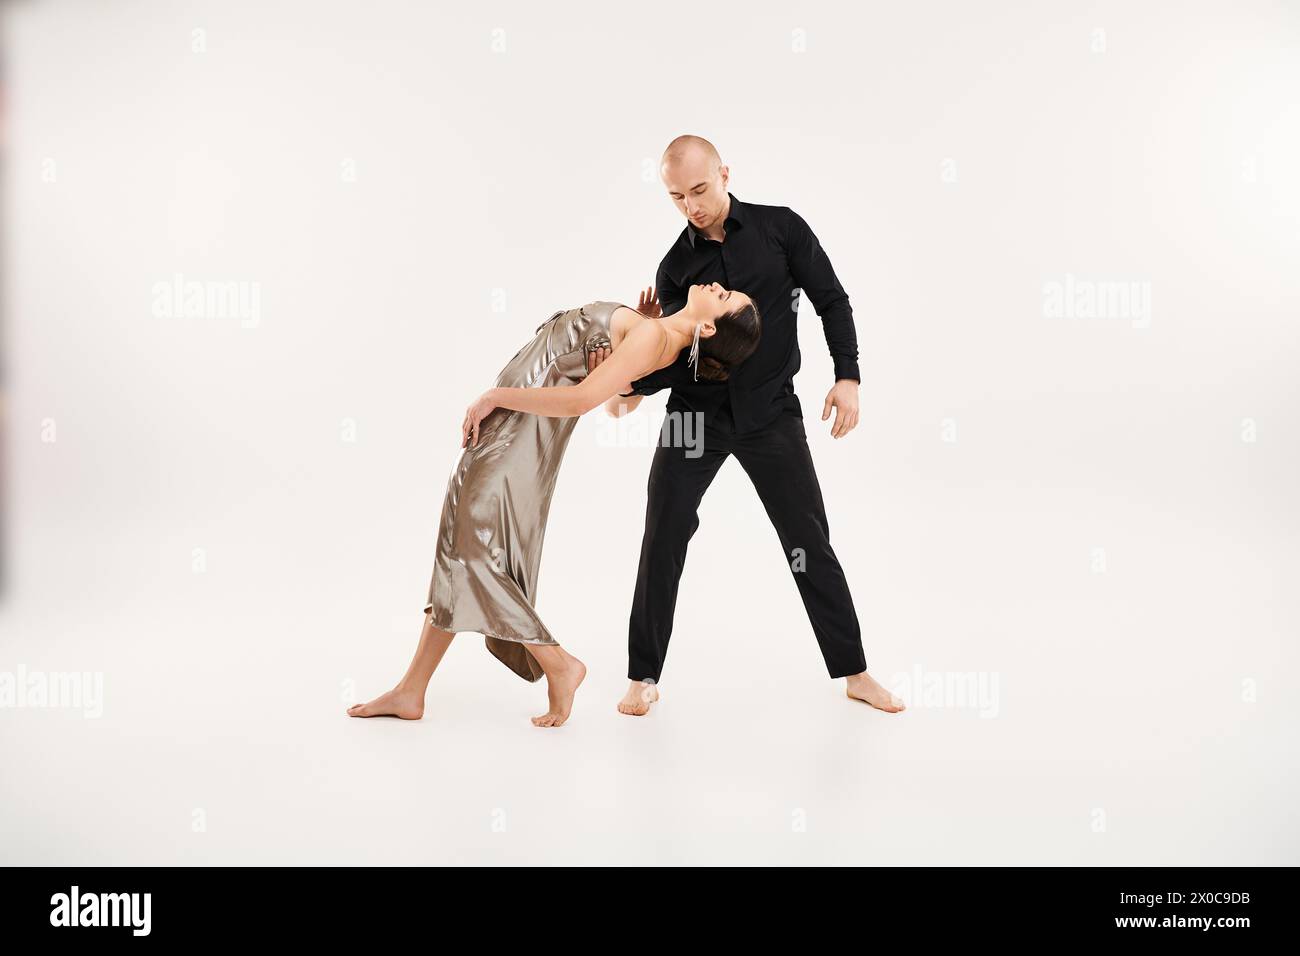 A young man in black and a young woman in a silver dress showcase grace and acrobatic elements in a dance pose. Stock Photo